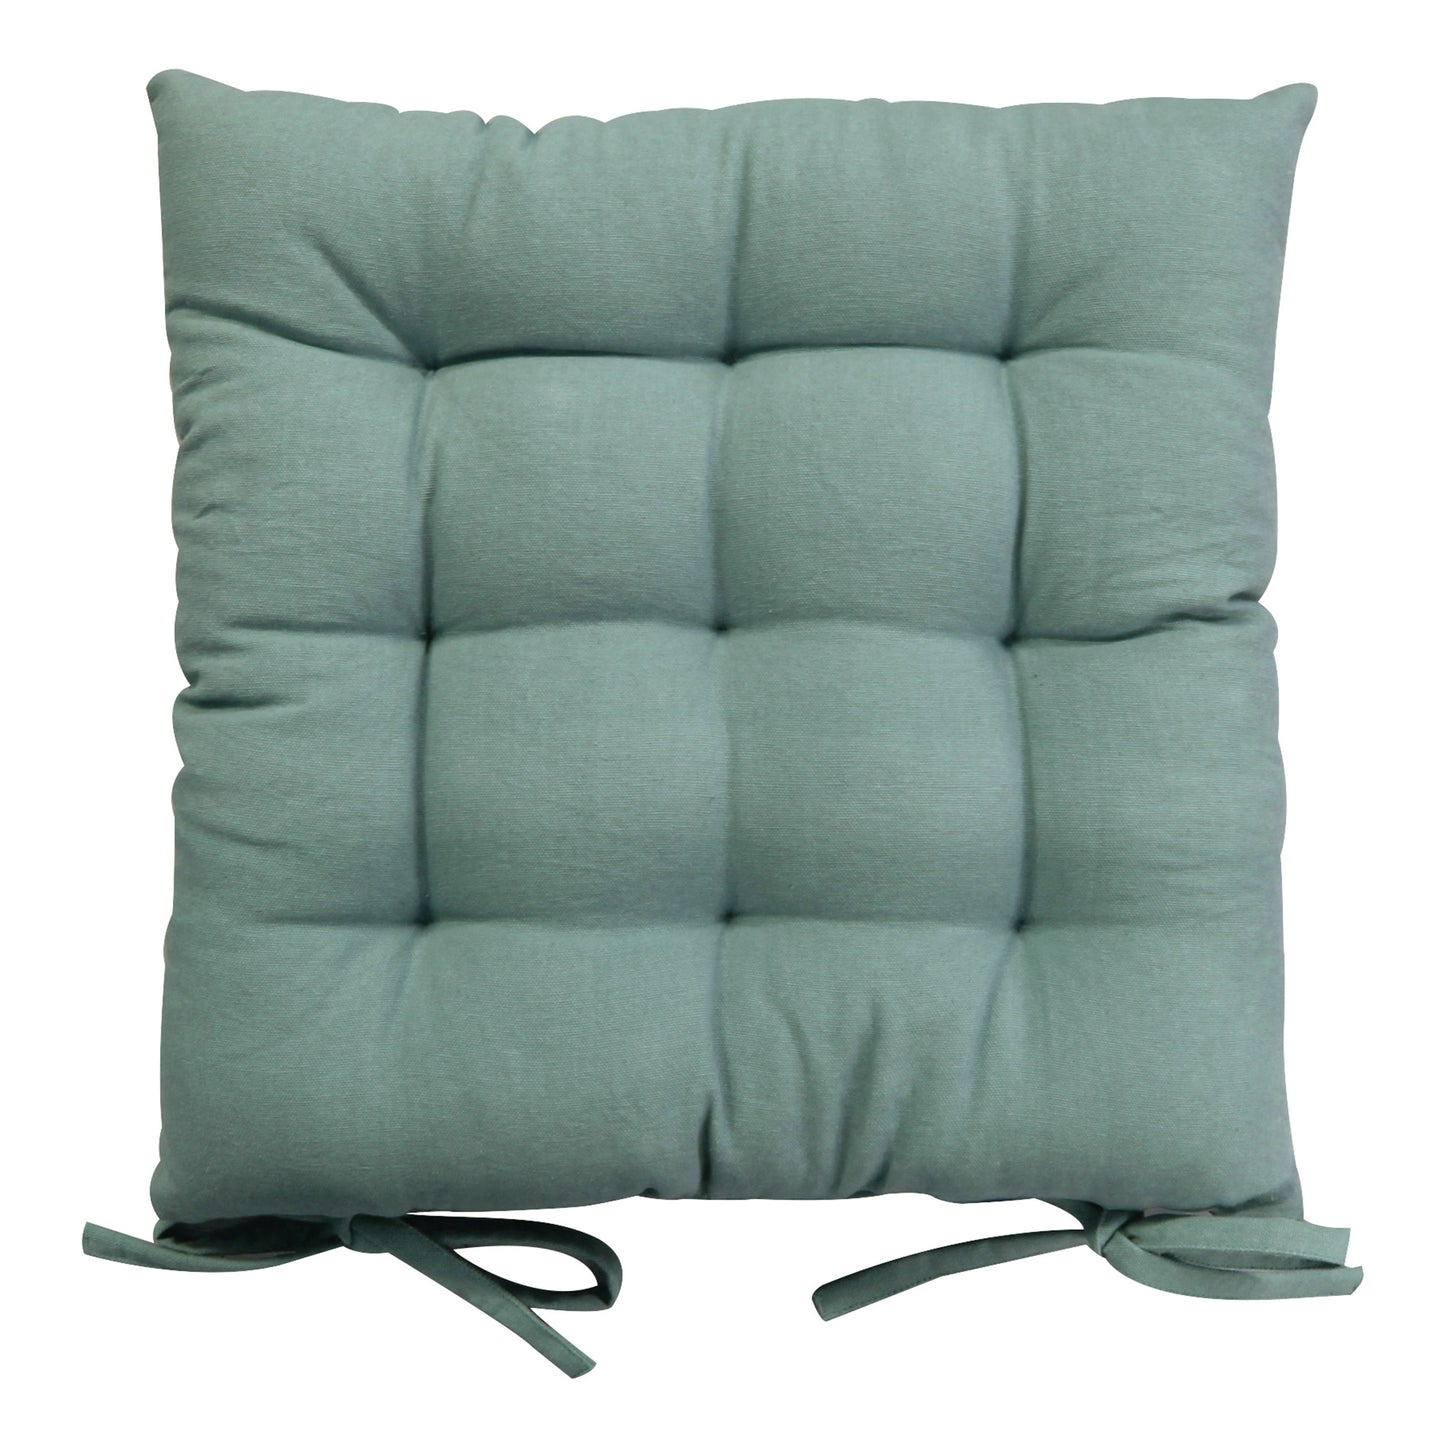 A Green Cotton Crinkle Seatpad (2pk) with ties, perfect for home furniture and interior decor.